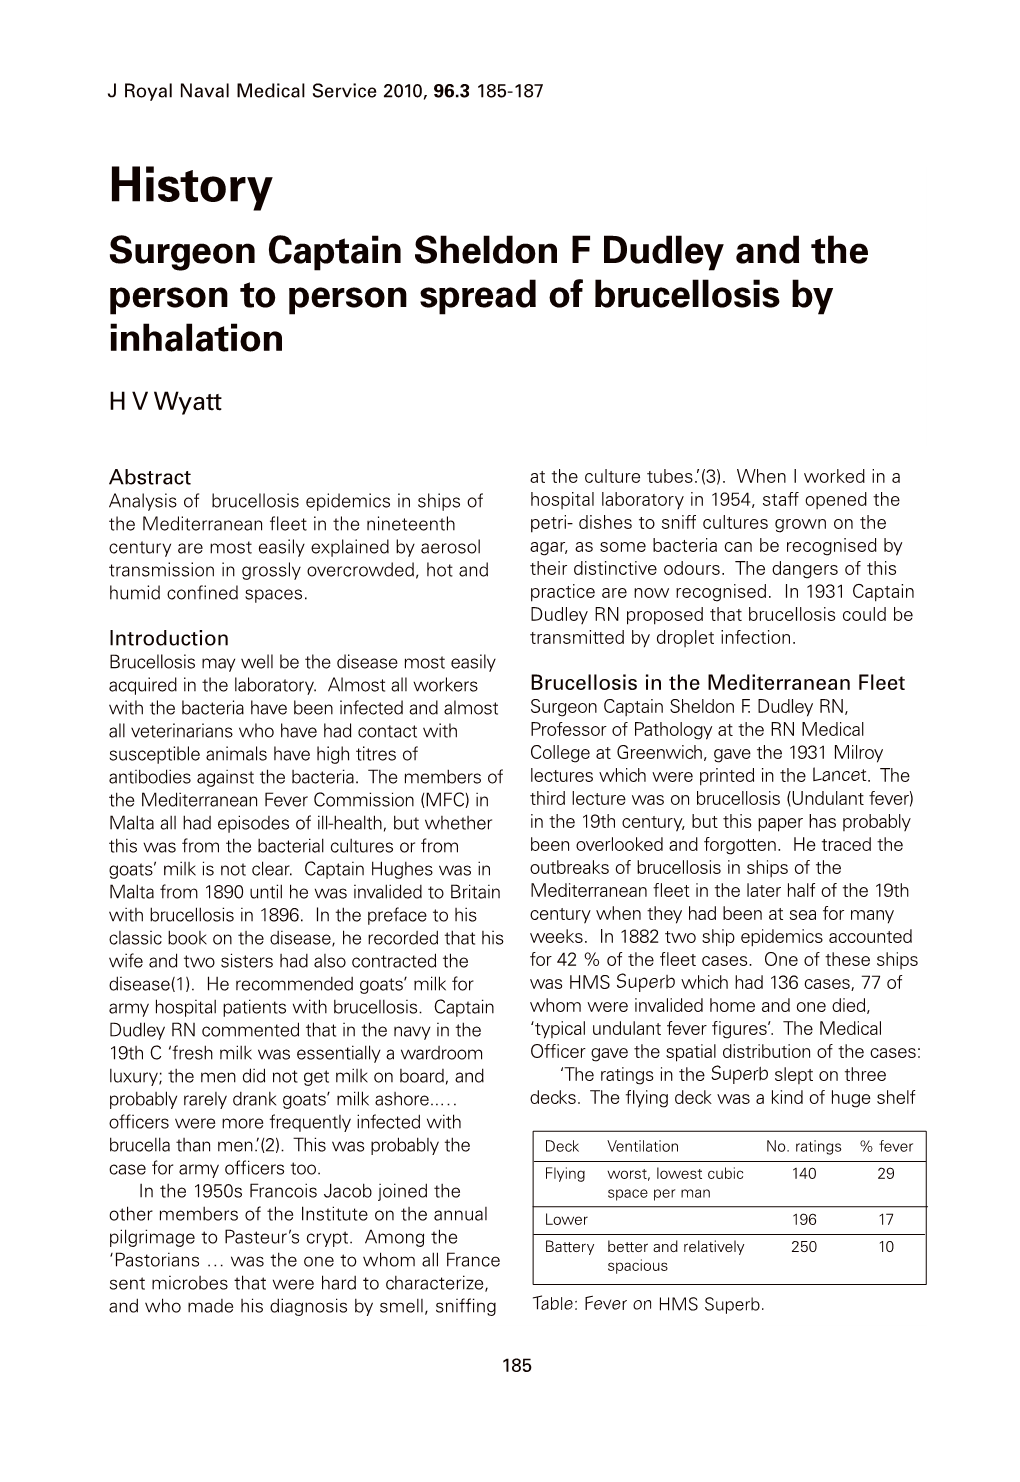 Surgeon Captain Sheldon F Dudley and the Person to Person Spread of Brucellosis by Inhalation